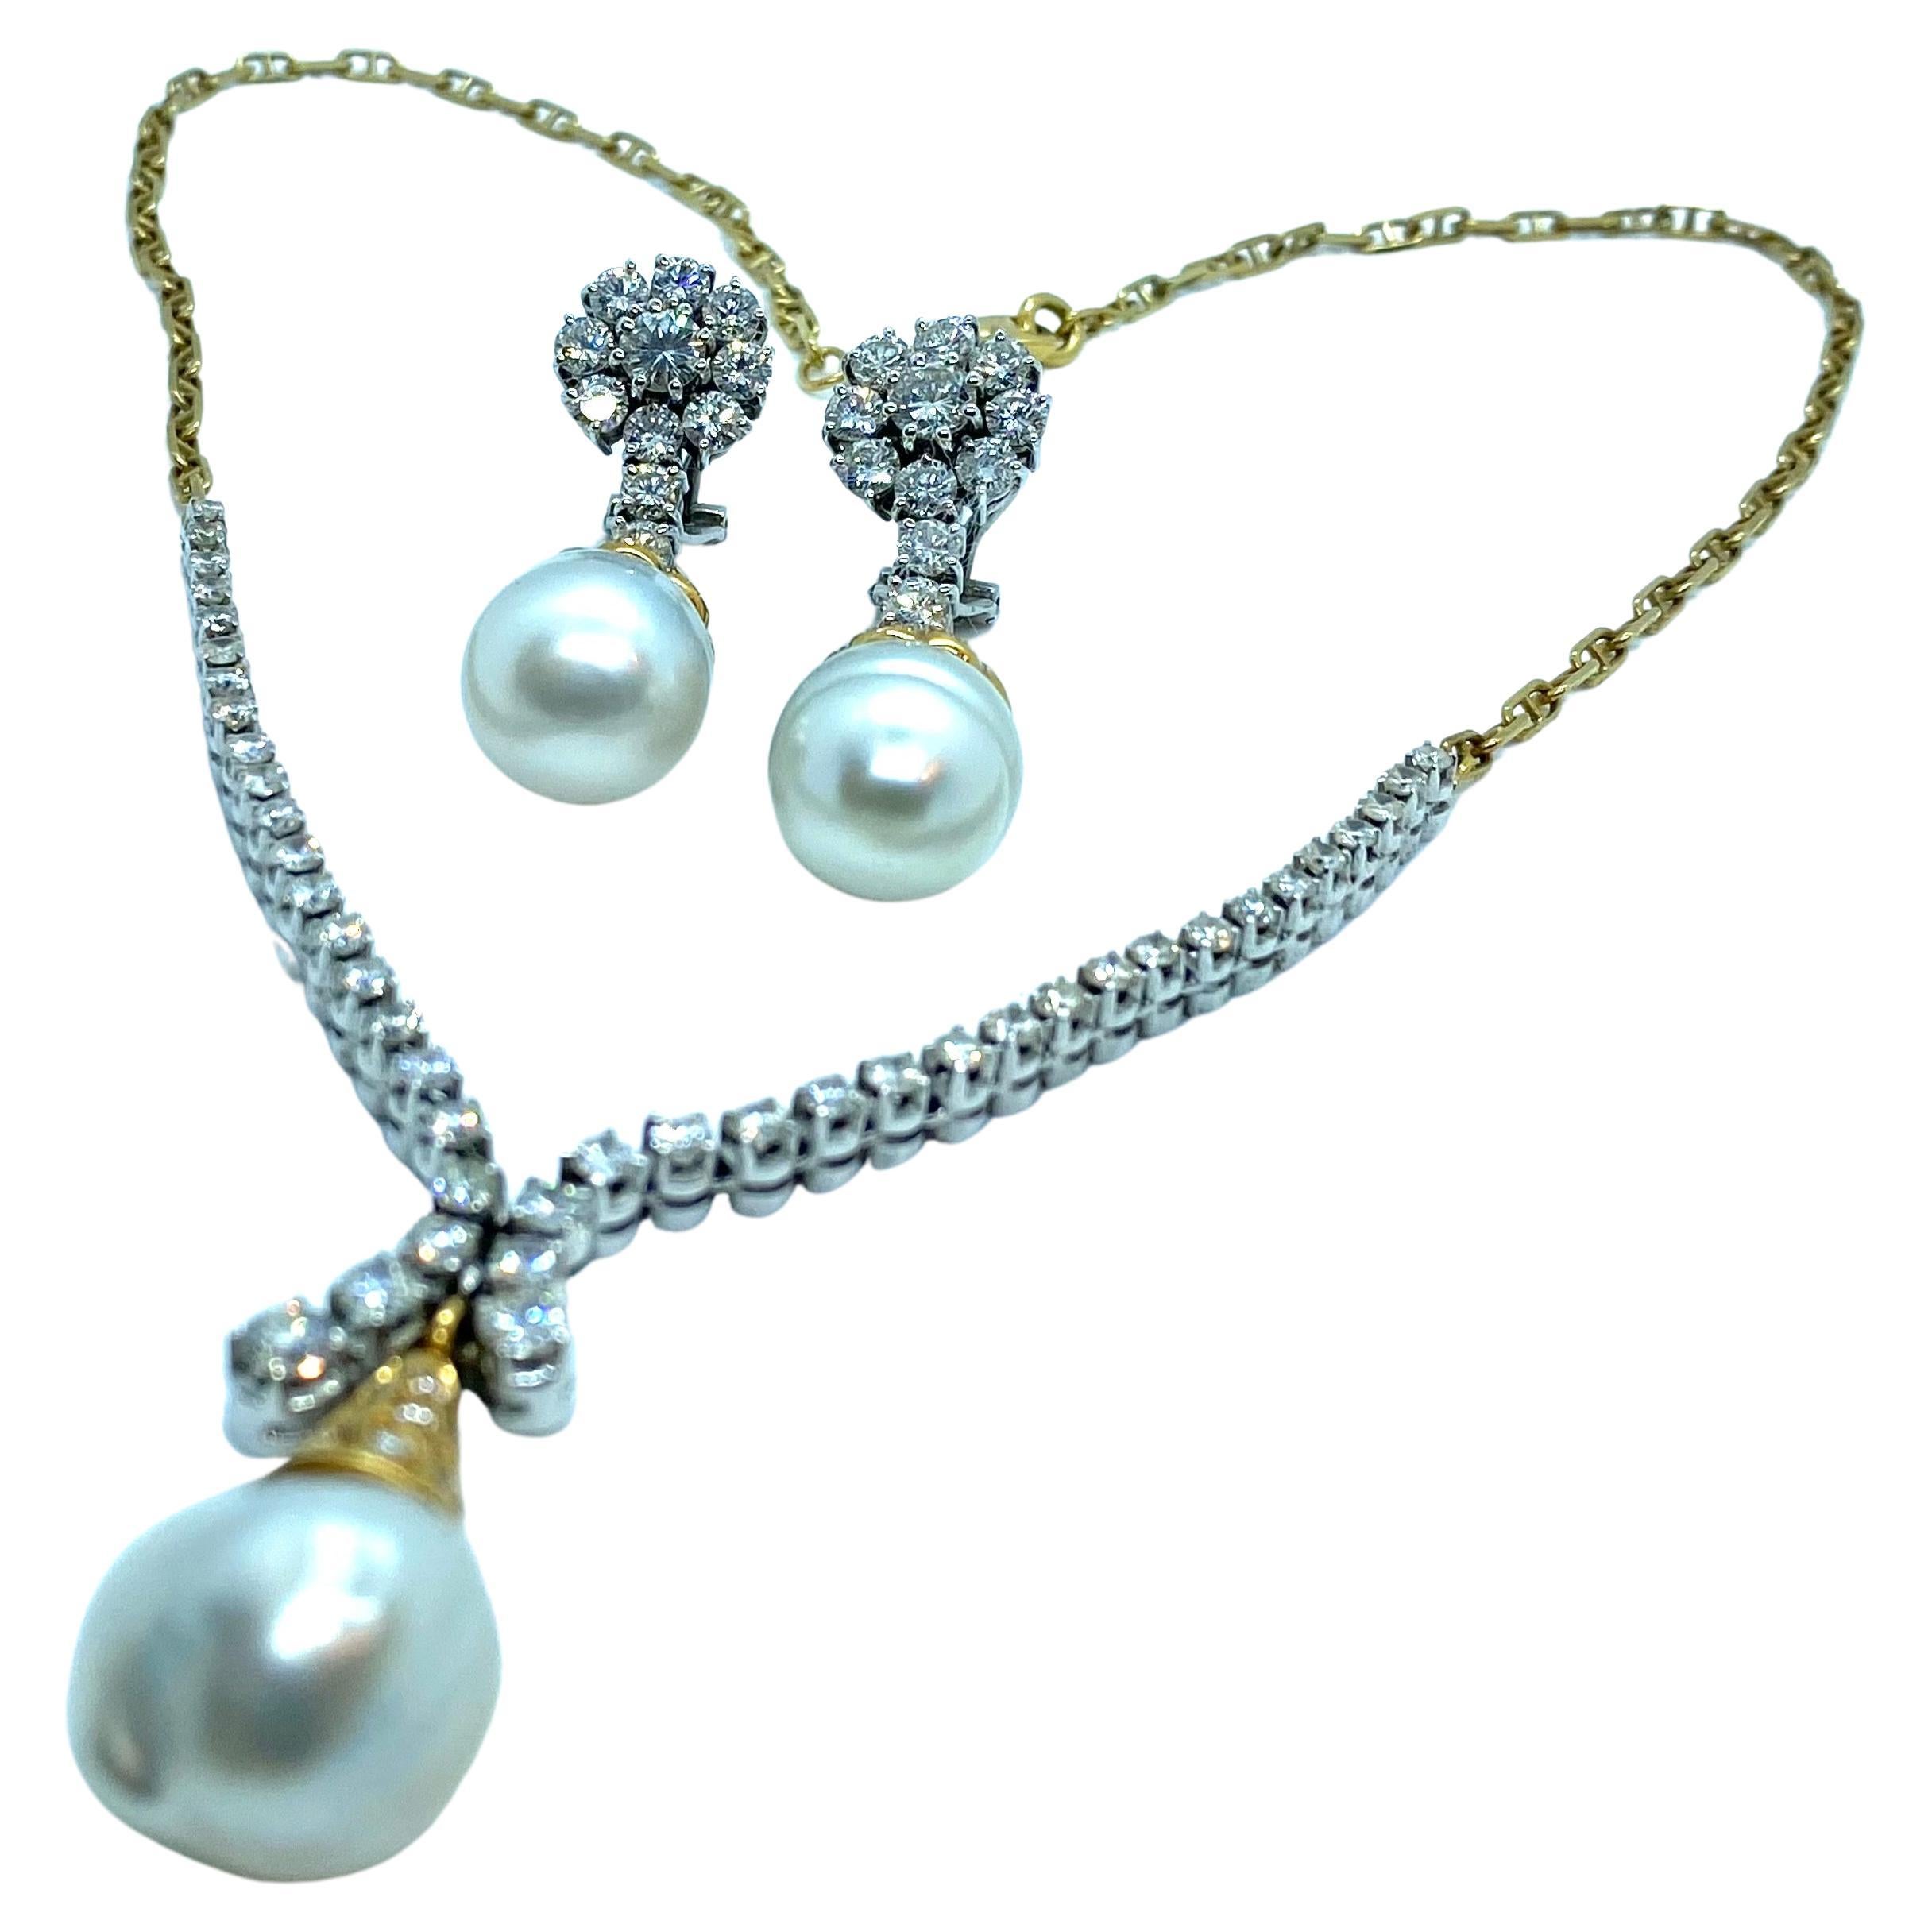 Exceptional pearls and diamonds necklace and pendant earrings Set